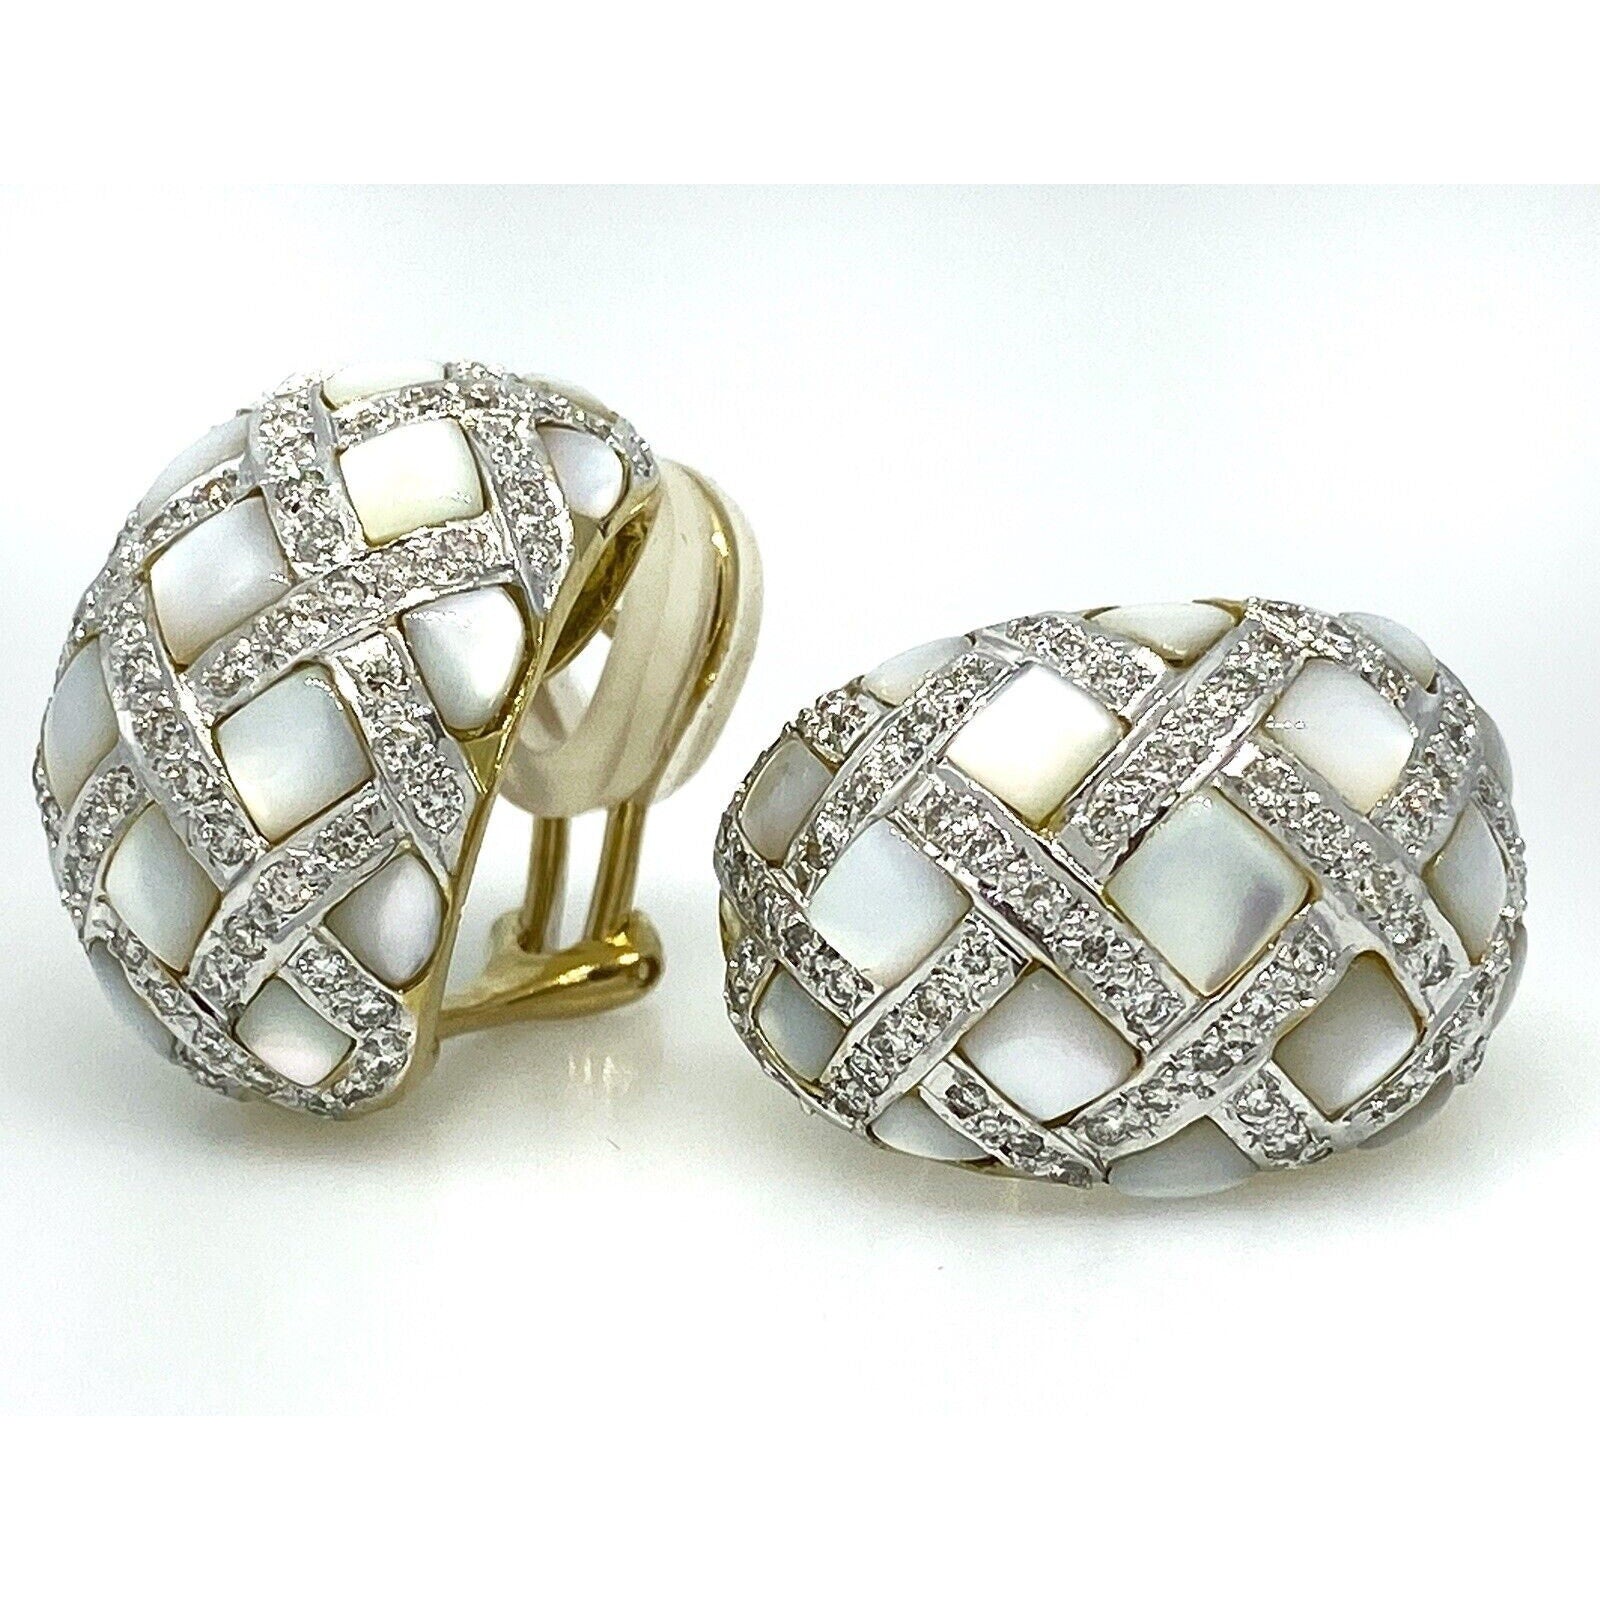 Diamond and Mother-of-Pearl Checkerboard Earrings in 18k White Gold